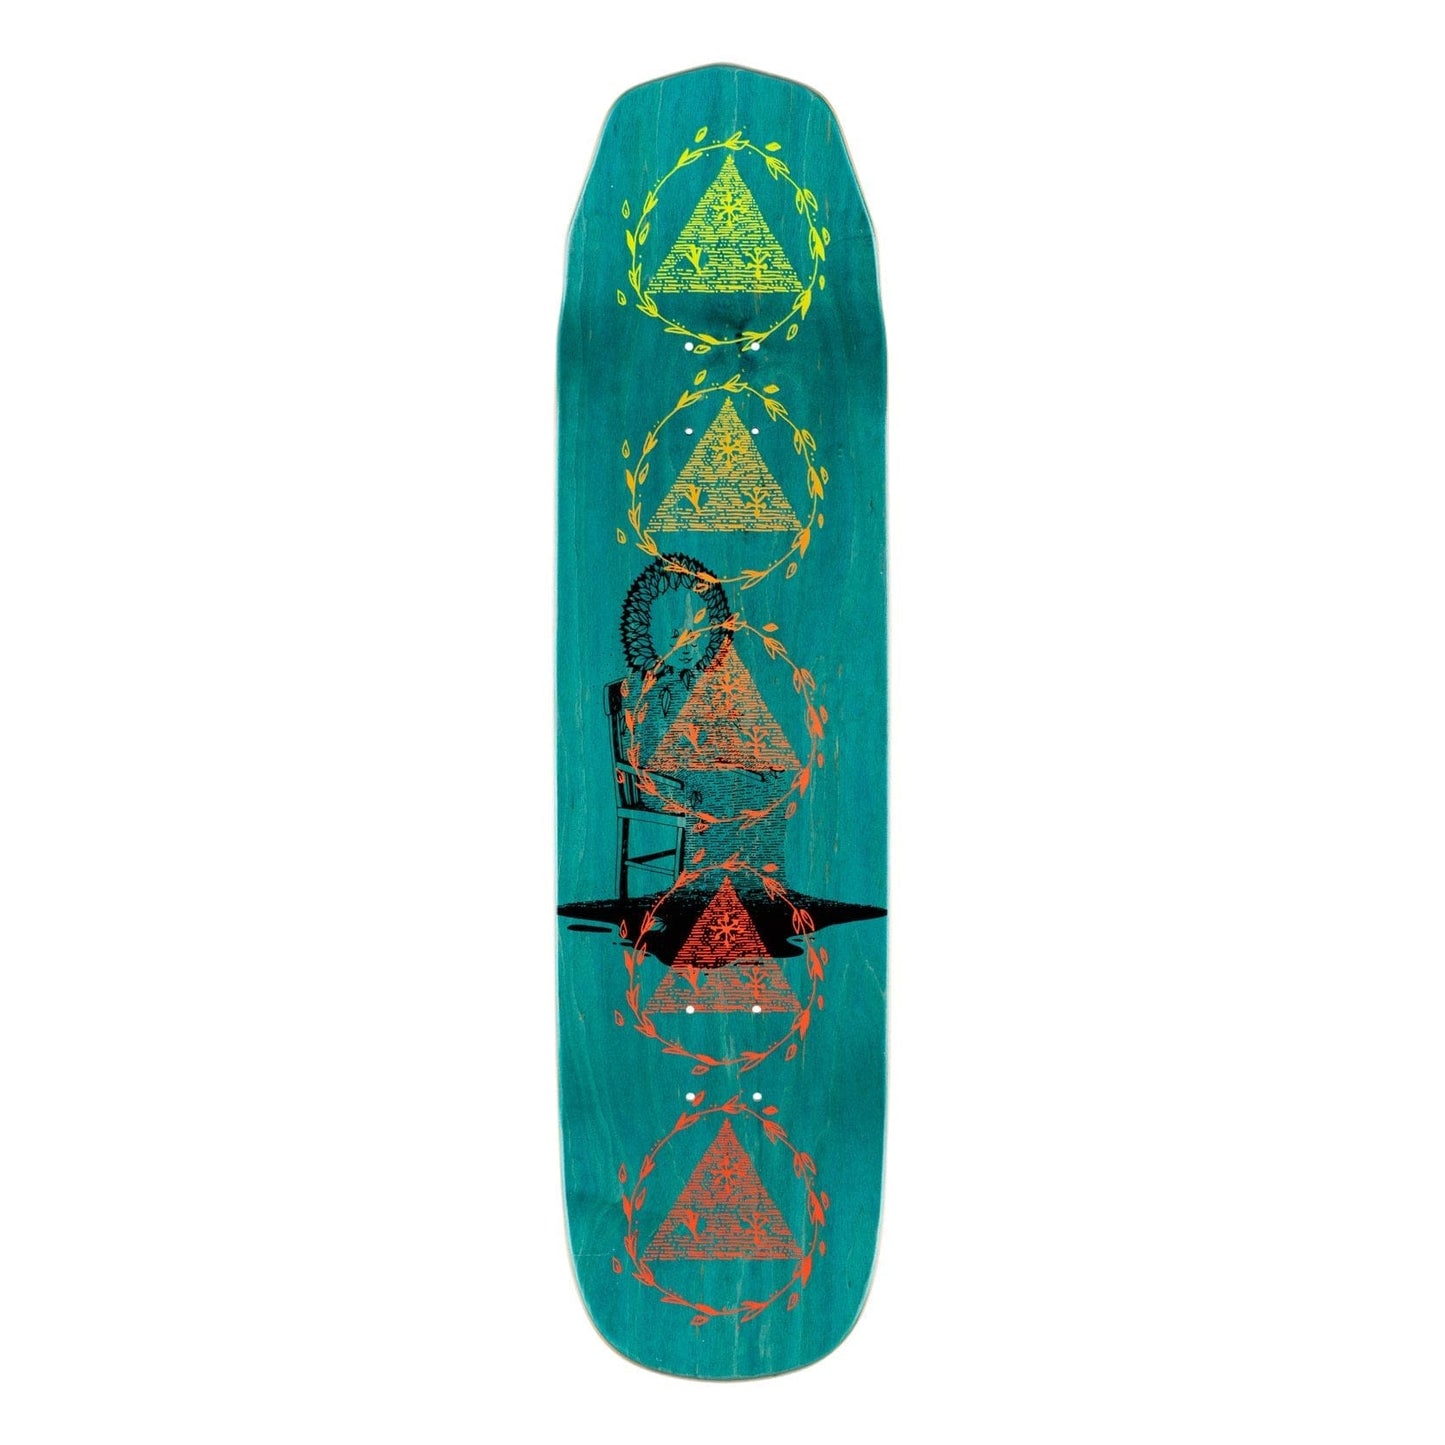 Welcome | 8.125" Nora Vasconcellos Soil on Wicked Princess - Bone/Teal Stain